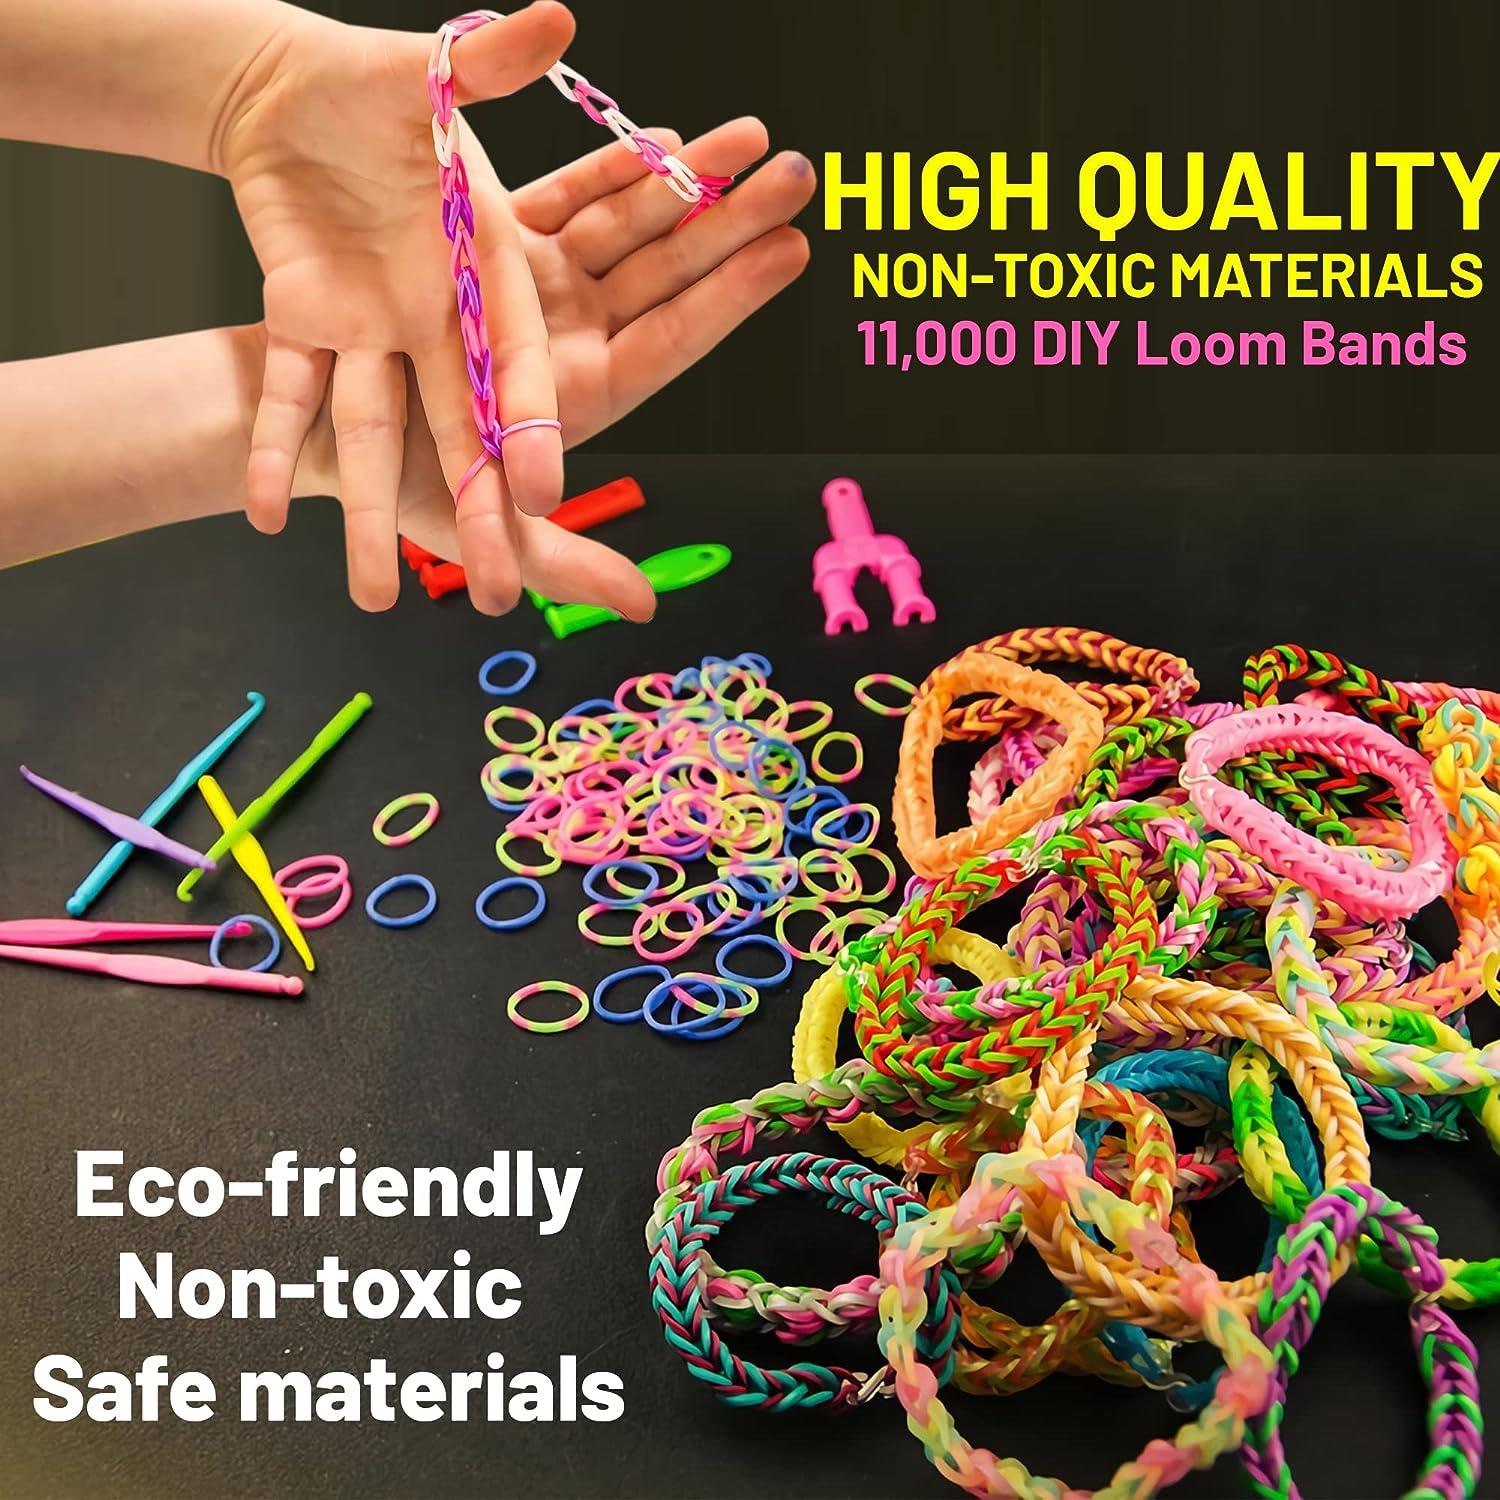 Amazon.com: Rubber Band Bracelet Kit - 2500+ Loom Bracelet Making Kit  Rubber Loom Bands Refill Set 23 Colors Bands Friendship Bracelet Making Kit  DIY Craft Gift with Beads, Charms, Y Loom, S-Clips,